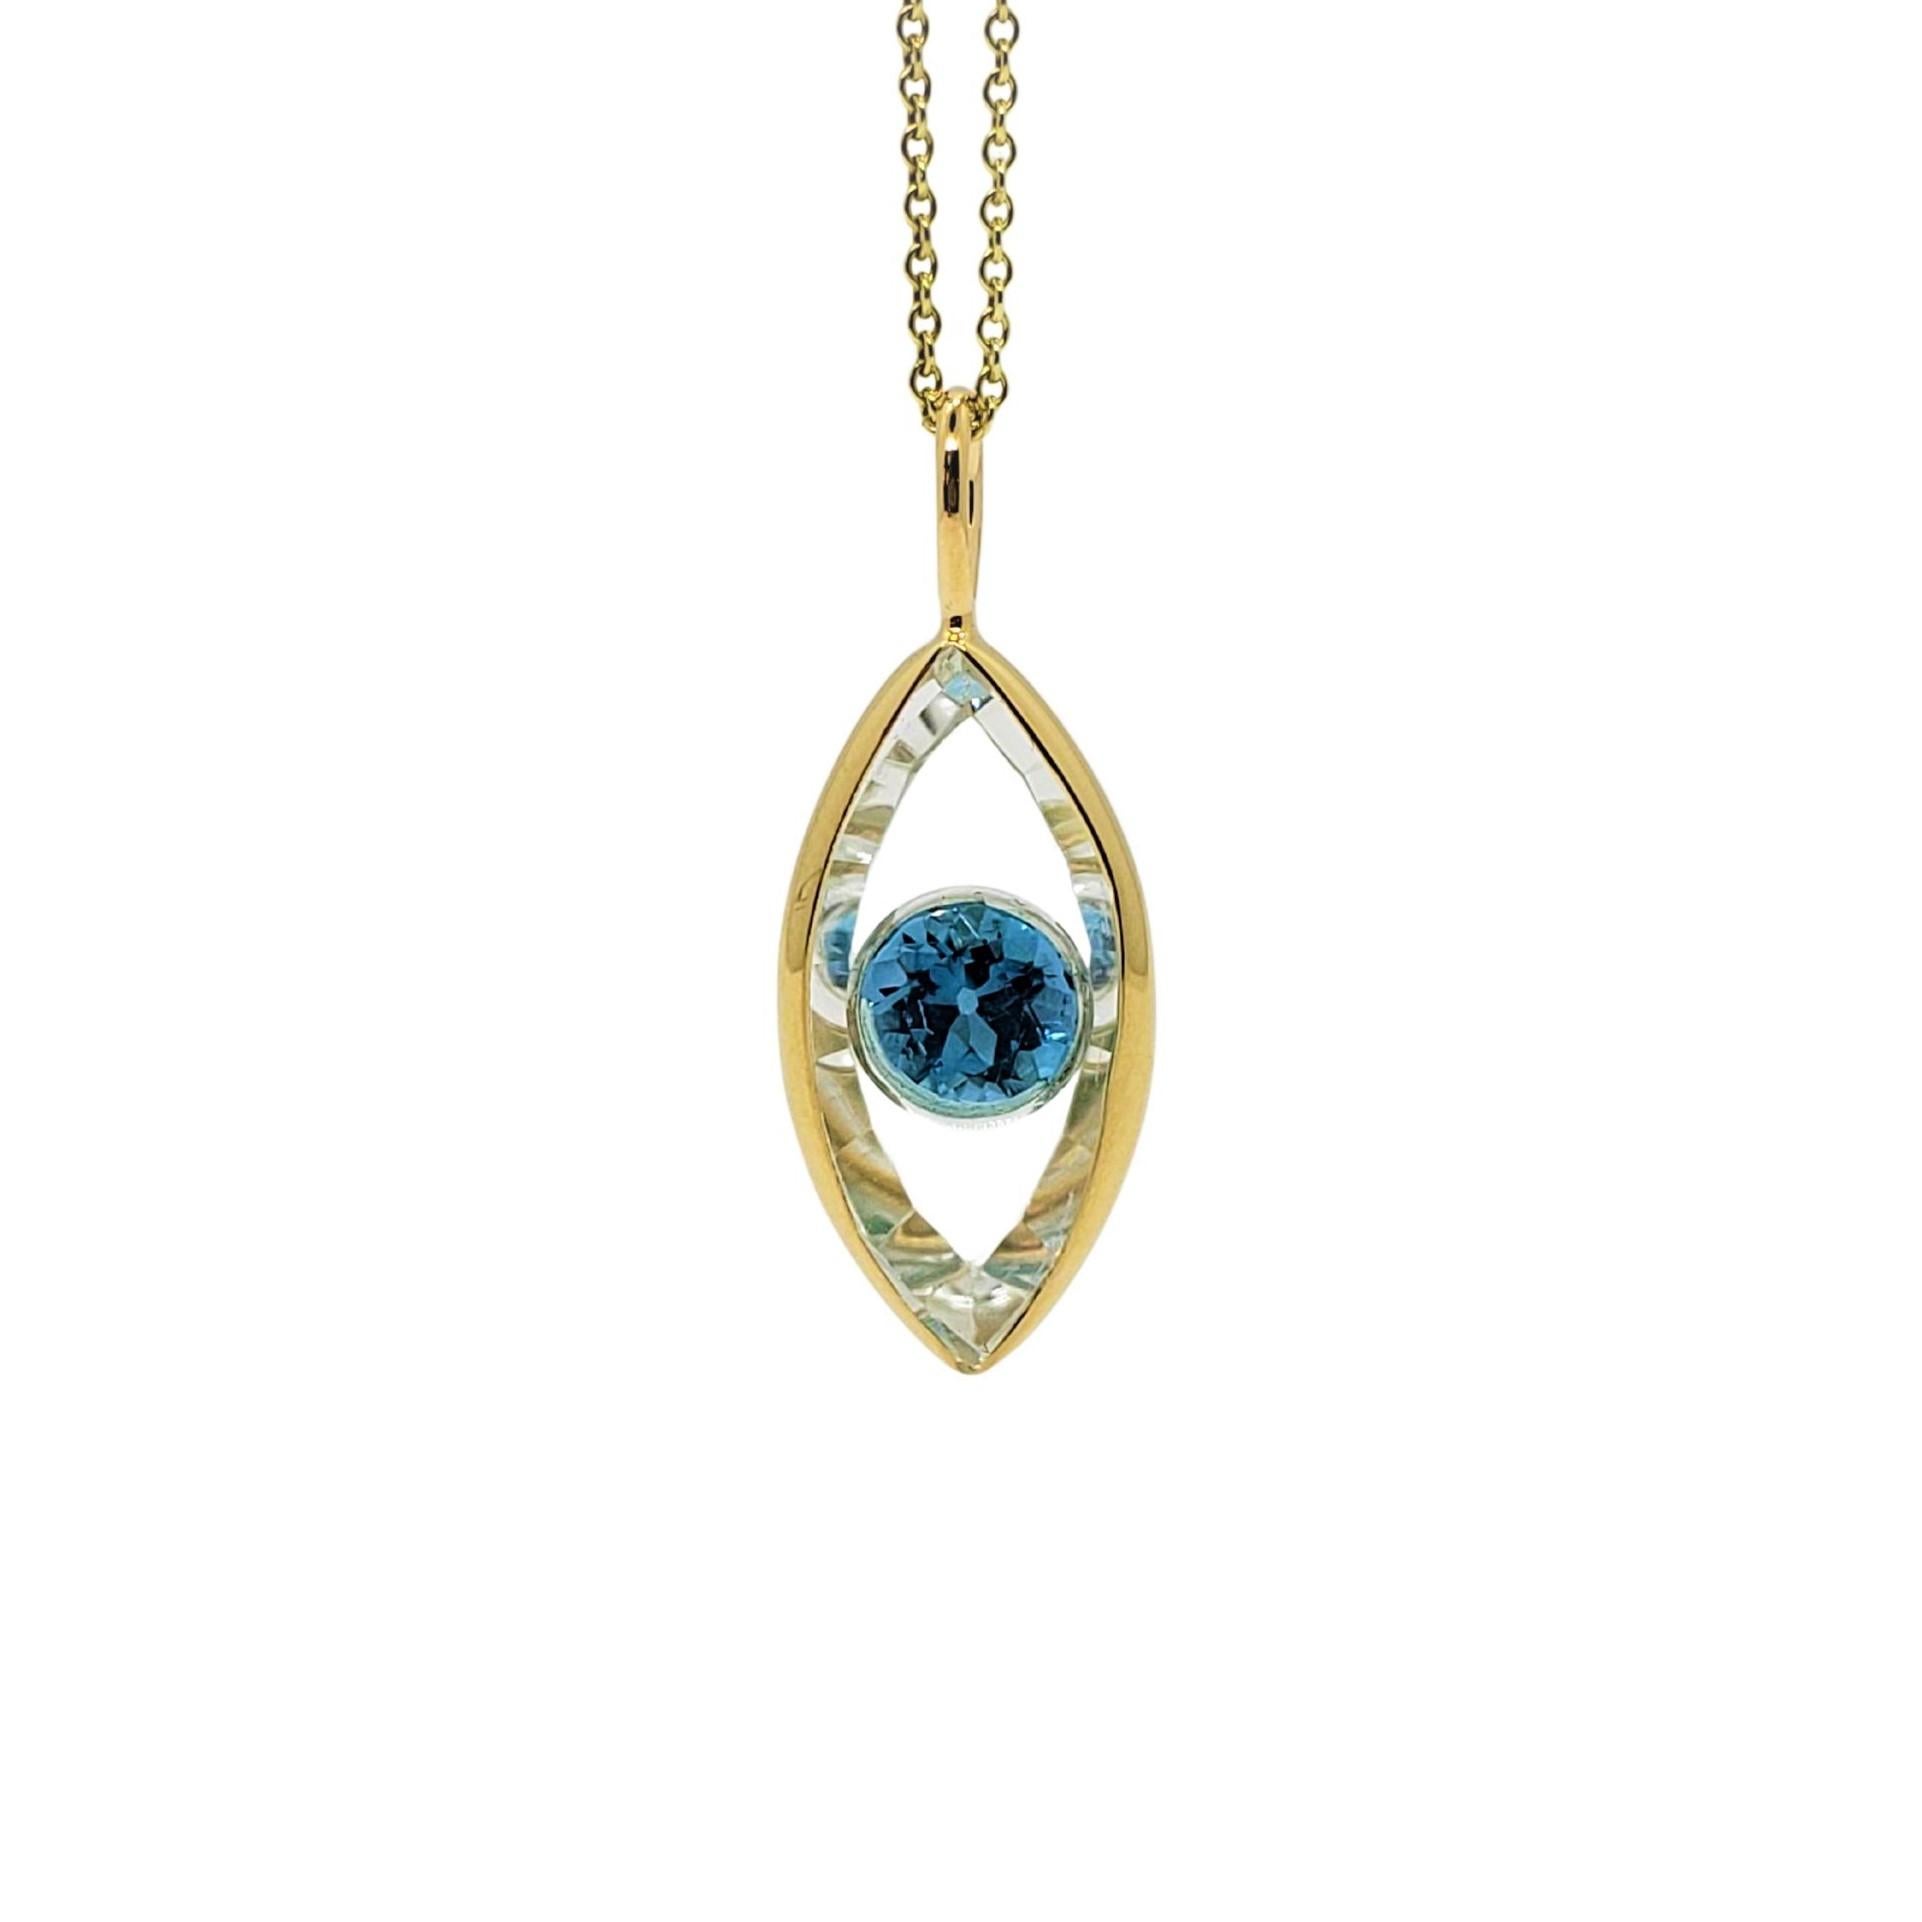 Talisman Necklace in handmade 14K yellow gold bezeled clear quartz marquise shape and either Blue Topaz or Peridot round gemstone center to achieve the look of an eye. There are many iconic amulets and themes that are believed to give protection